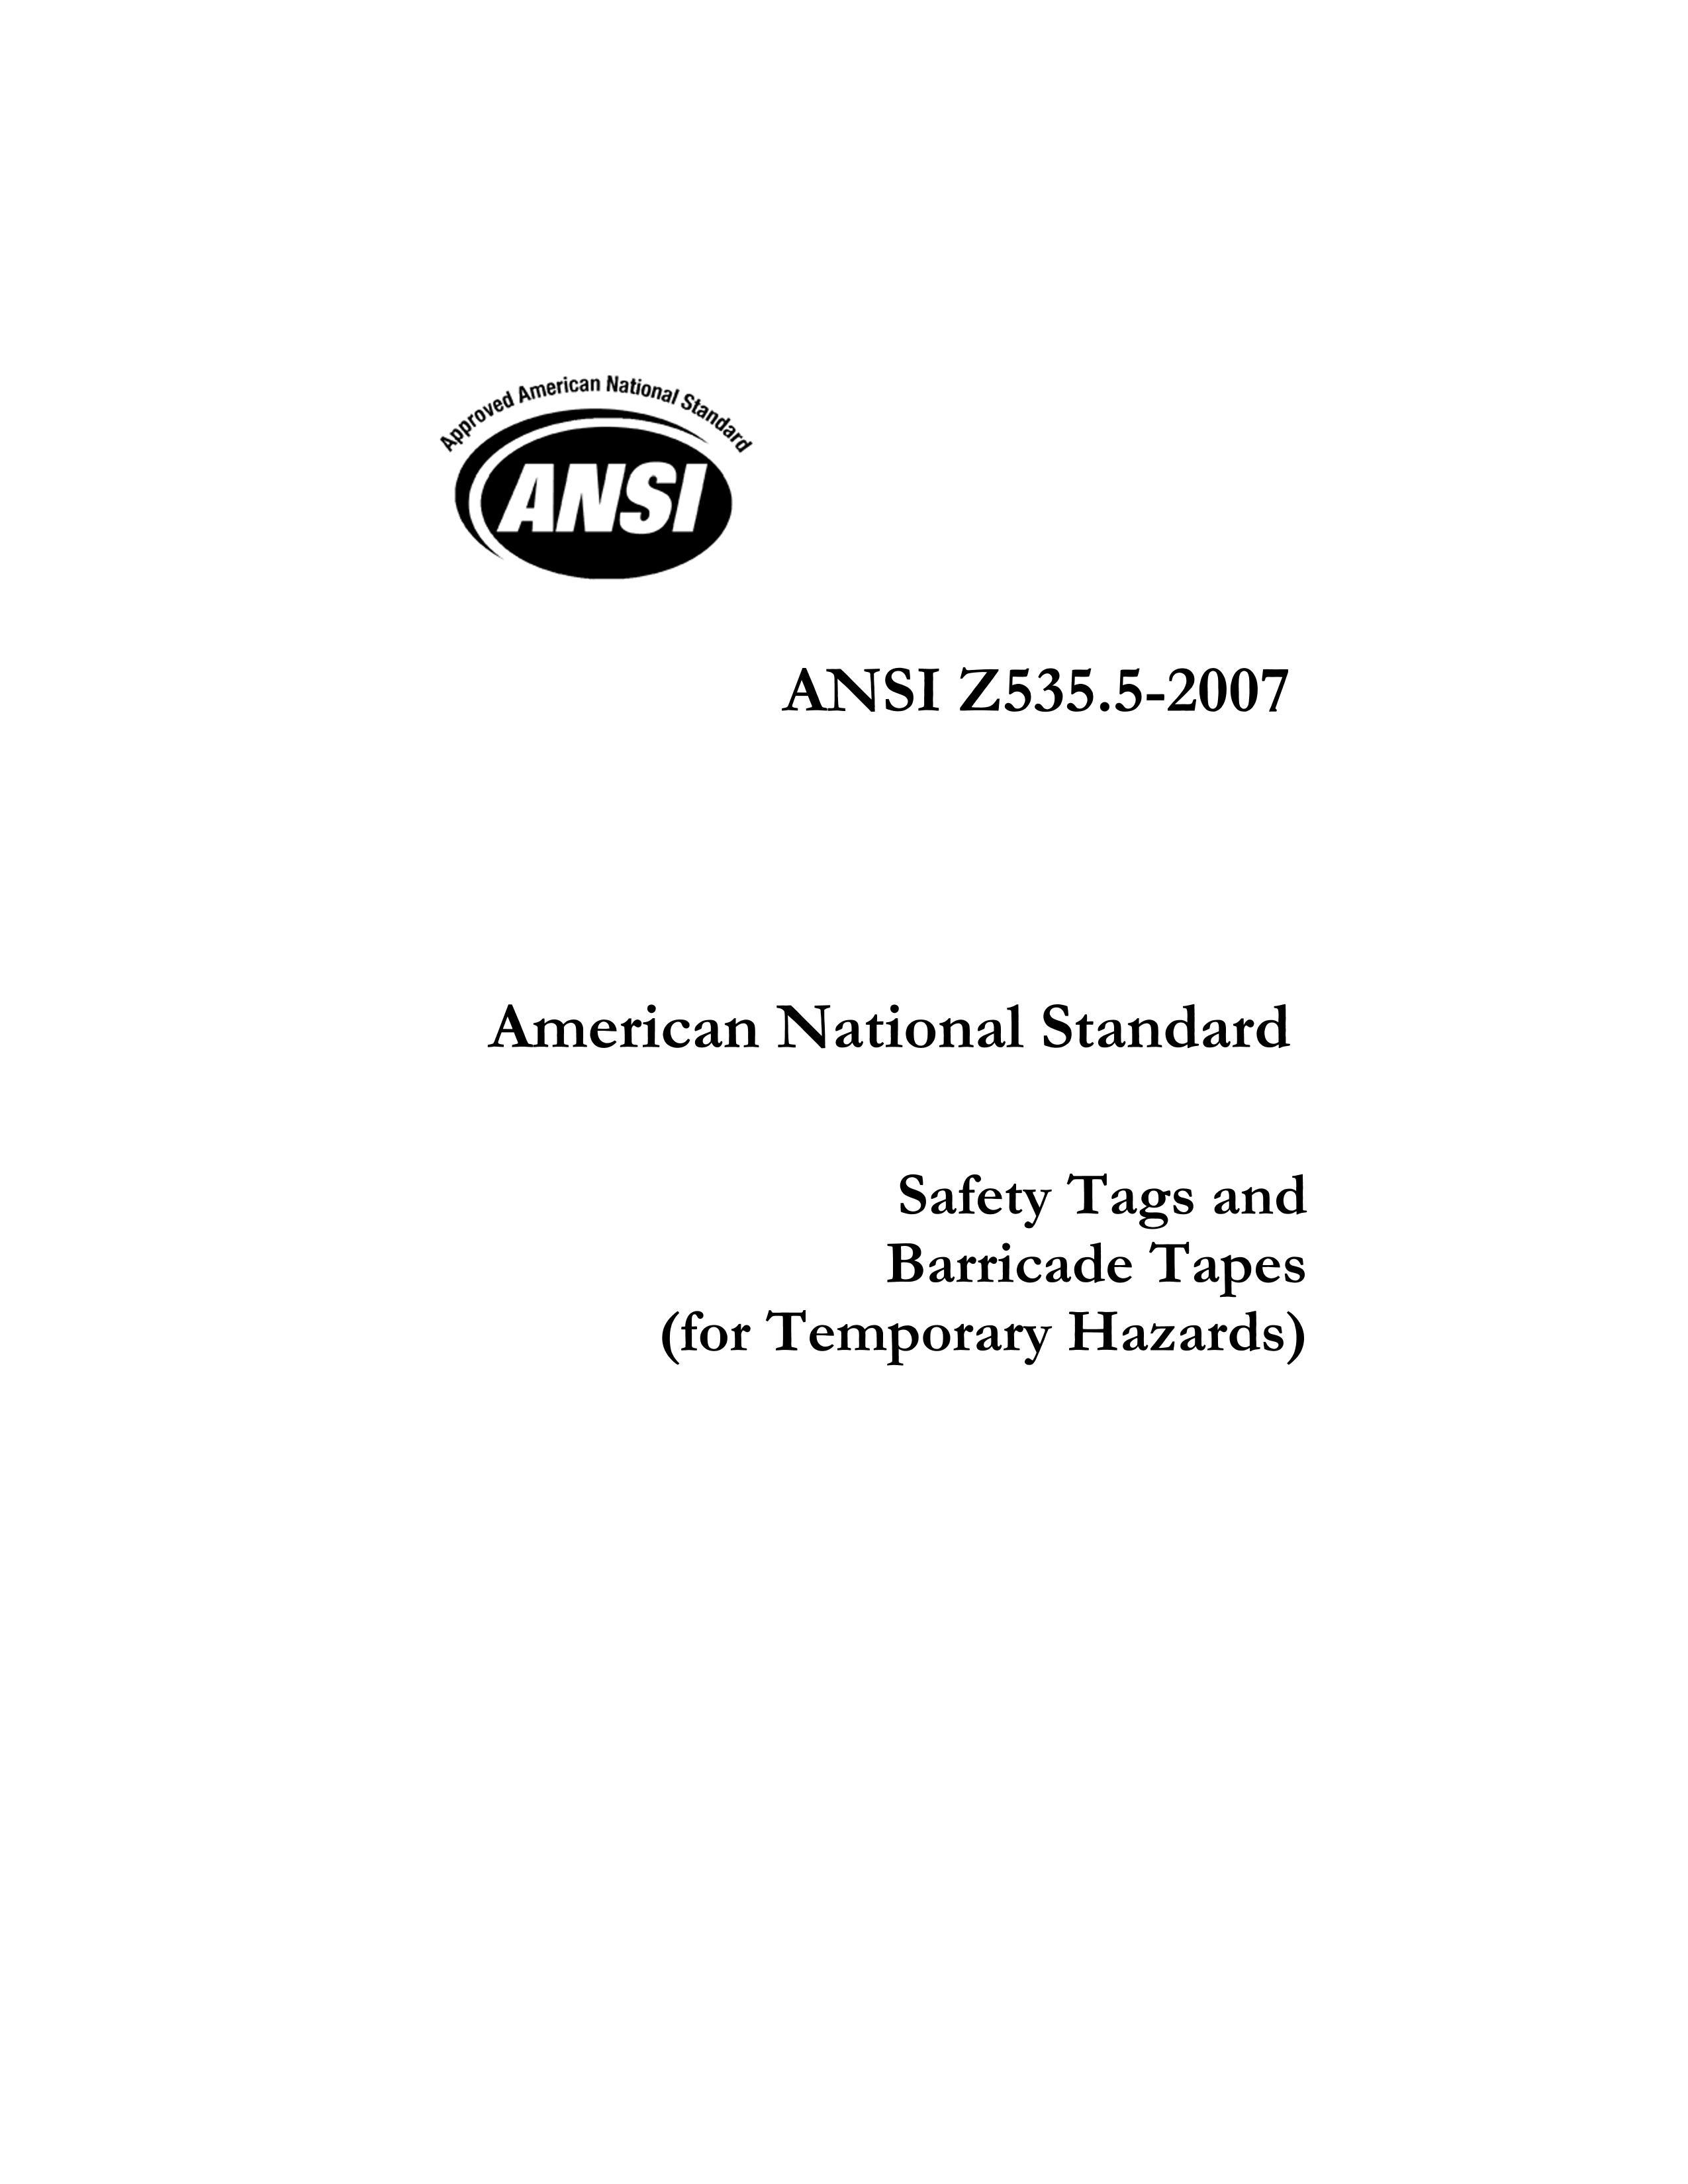 ANSI Z535.5-2007 American National Standard Safety Tags and Barricade Tapes.pdf1ҳ